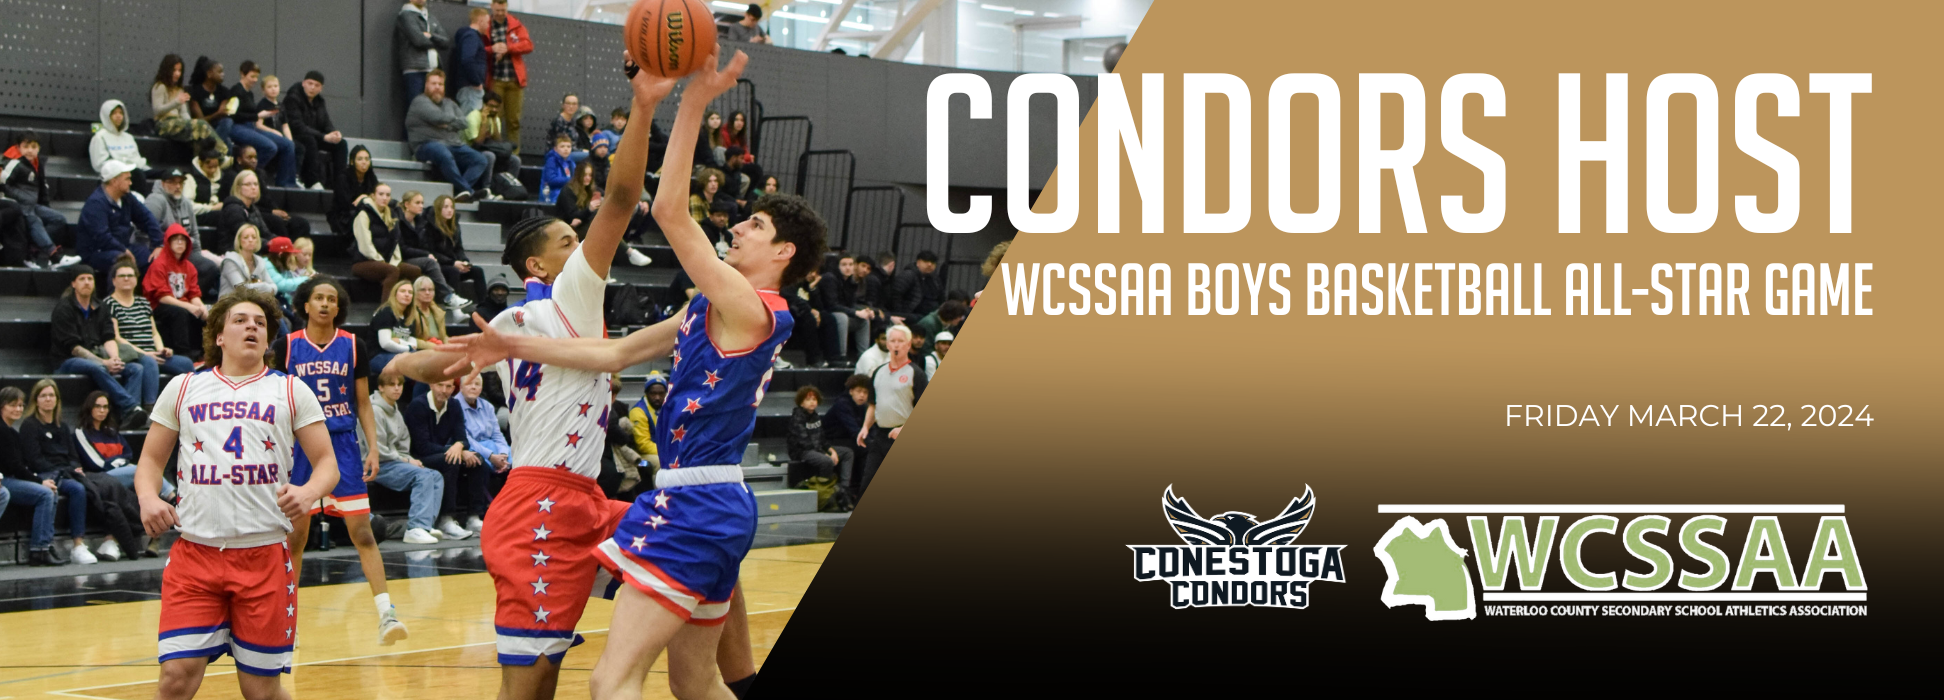 Text that reads: Condors Host WCSSAA Boys Basketball All-Star Game. 

Conestoga Condors Logo 
WCSSAA logo 

Photo of boys playing basketball